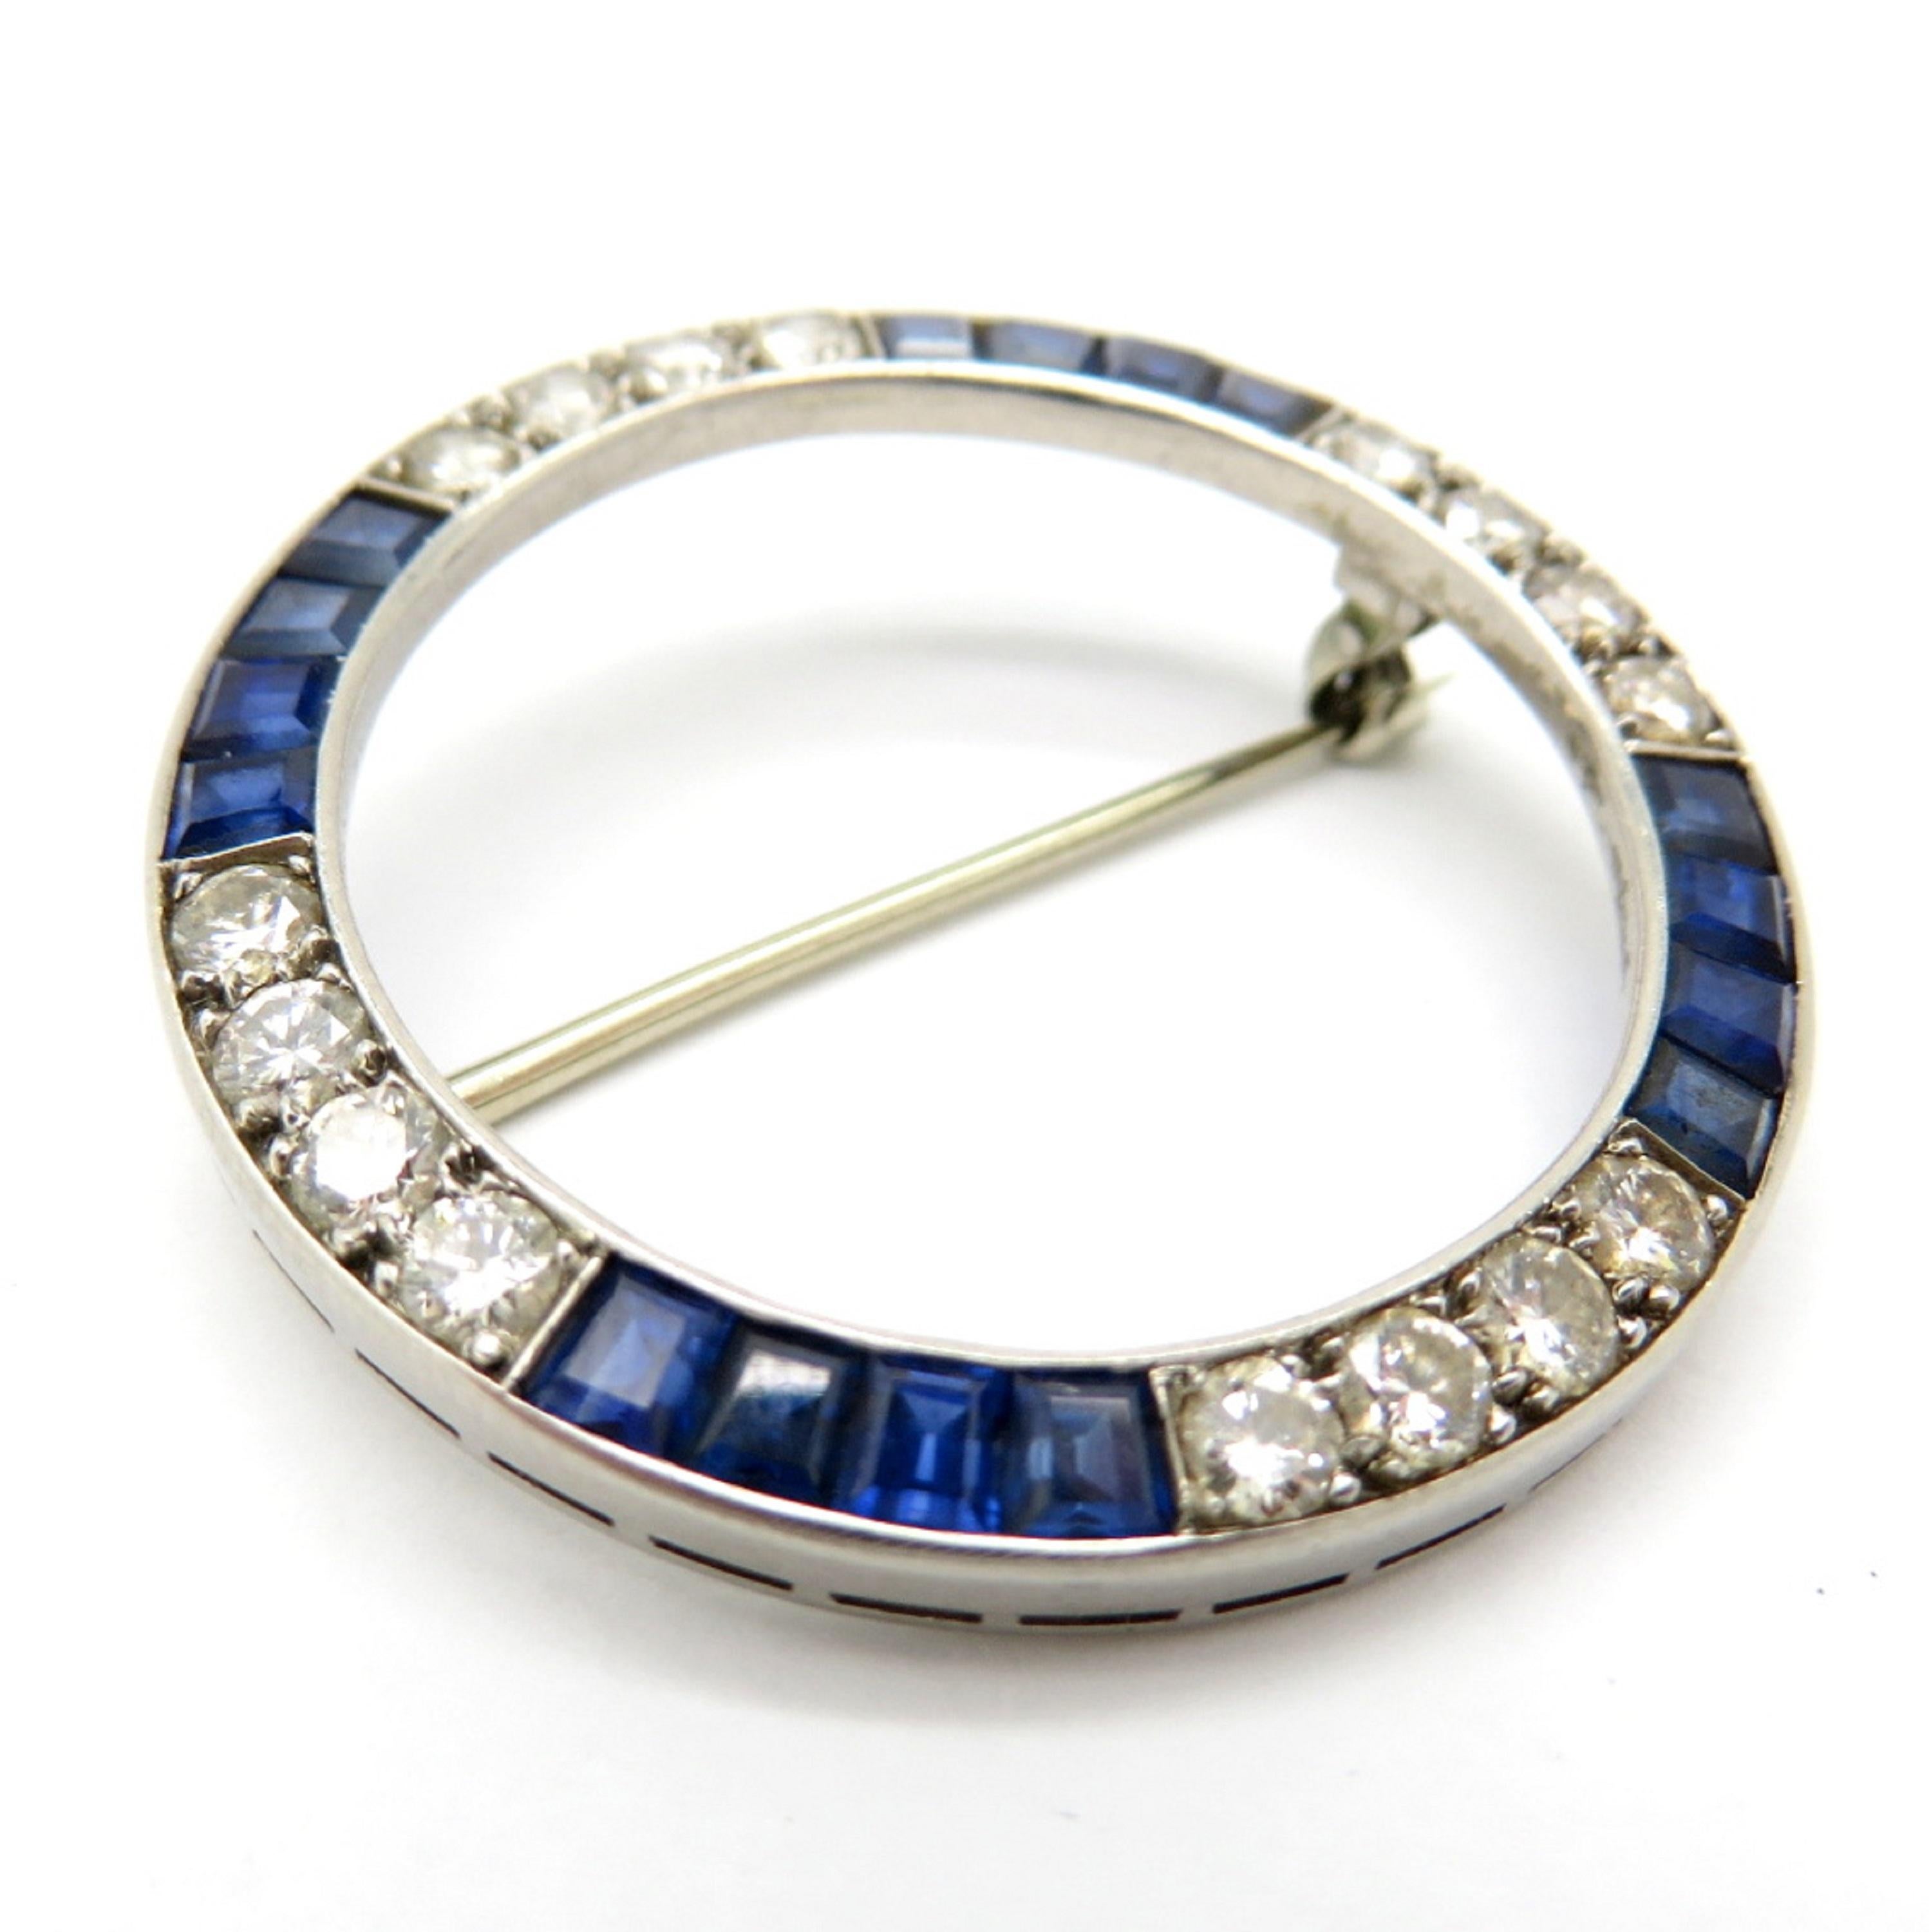 For sale is a classic Estate Diamond & Sapphire Circular Pin!
Featuring sixteen (16) Round Brilliant Cut diamonds, measuring 2.75 mm each average, weighing a total of 1.00 carats. 
Diamond Grading: Color Grade: H-I. Clarity Grade: SI1.
Showcasing